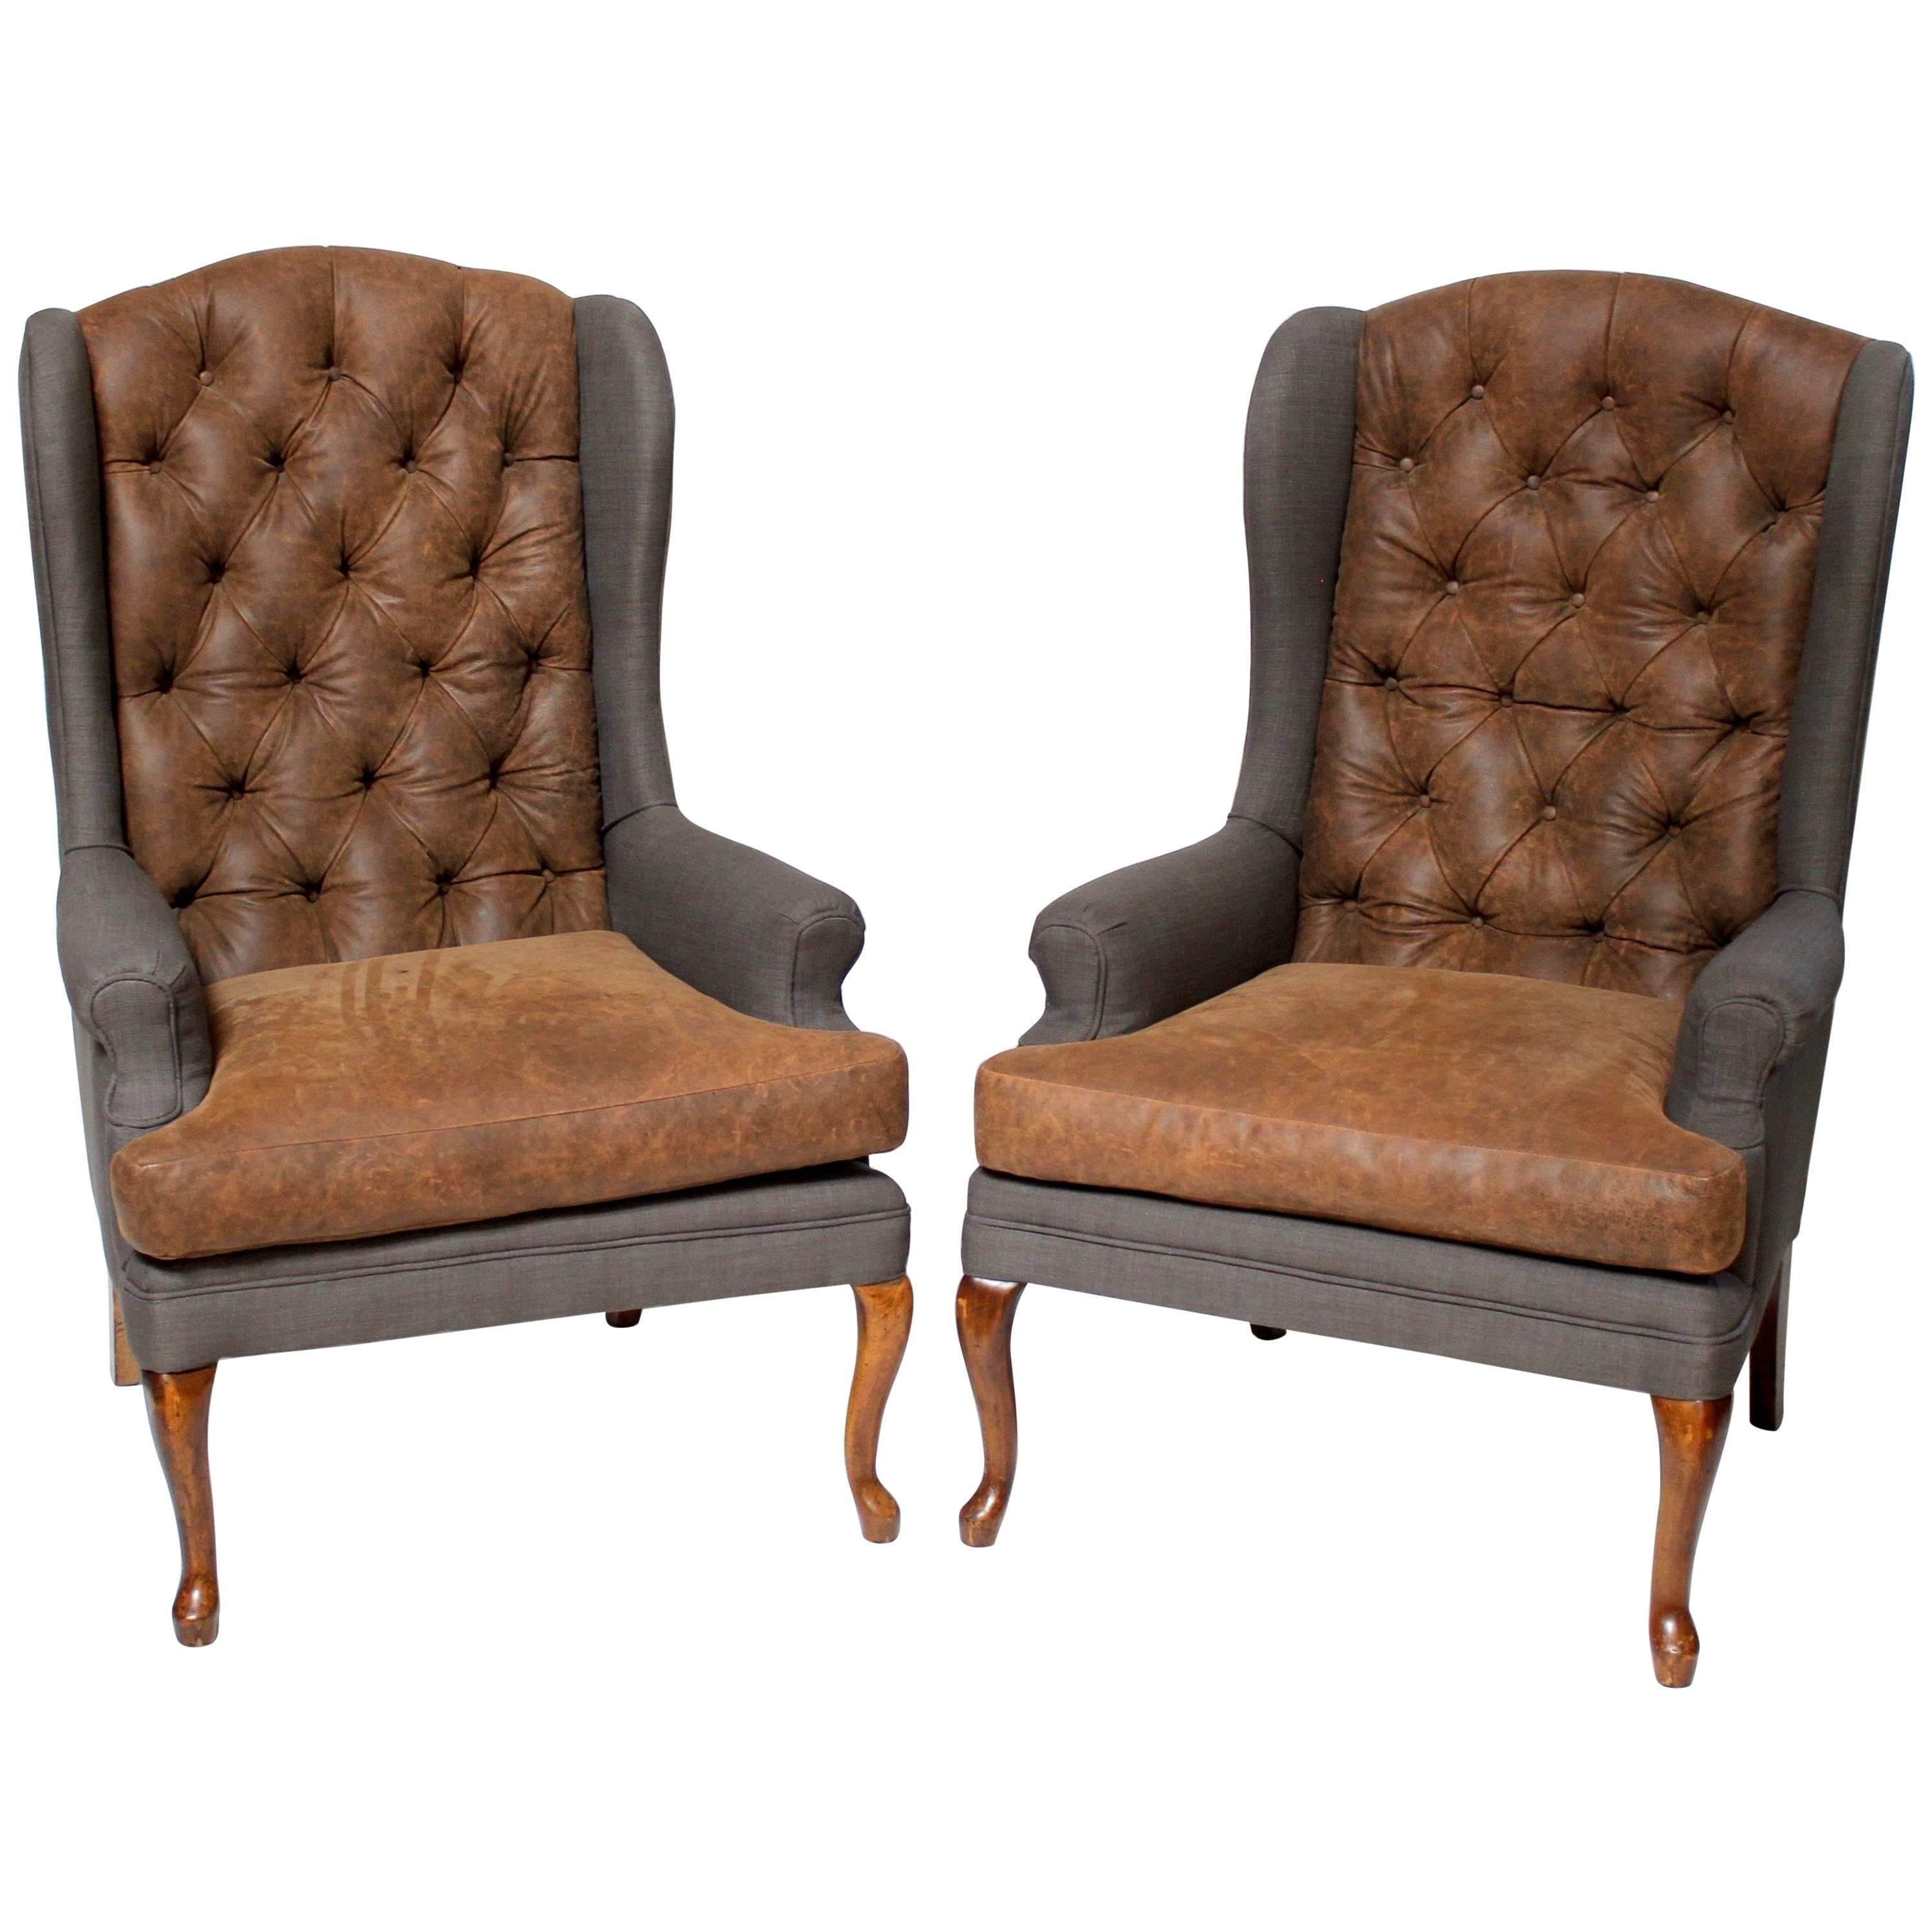 Pair of Vintage American Hardwood Wingback Chairs with Napa Leather Upholstery